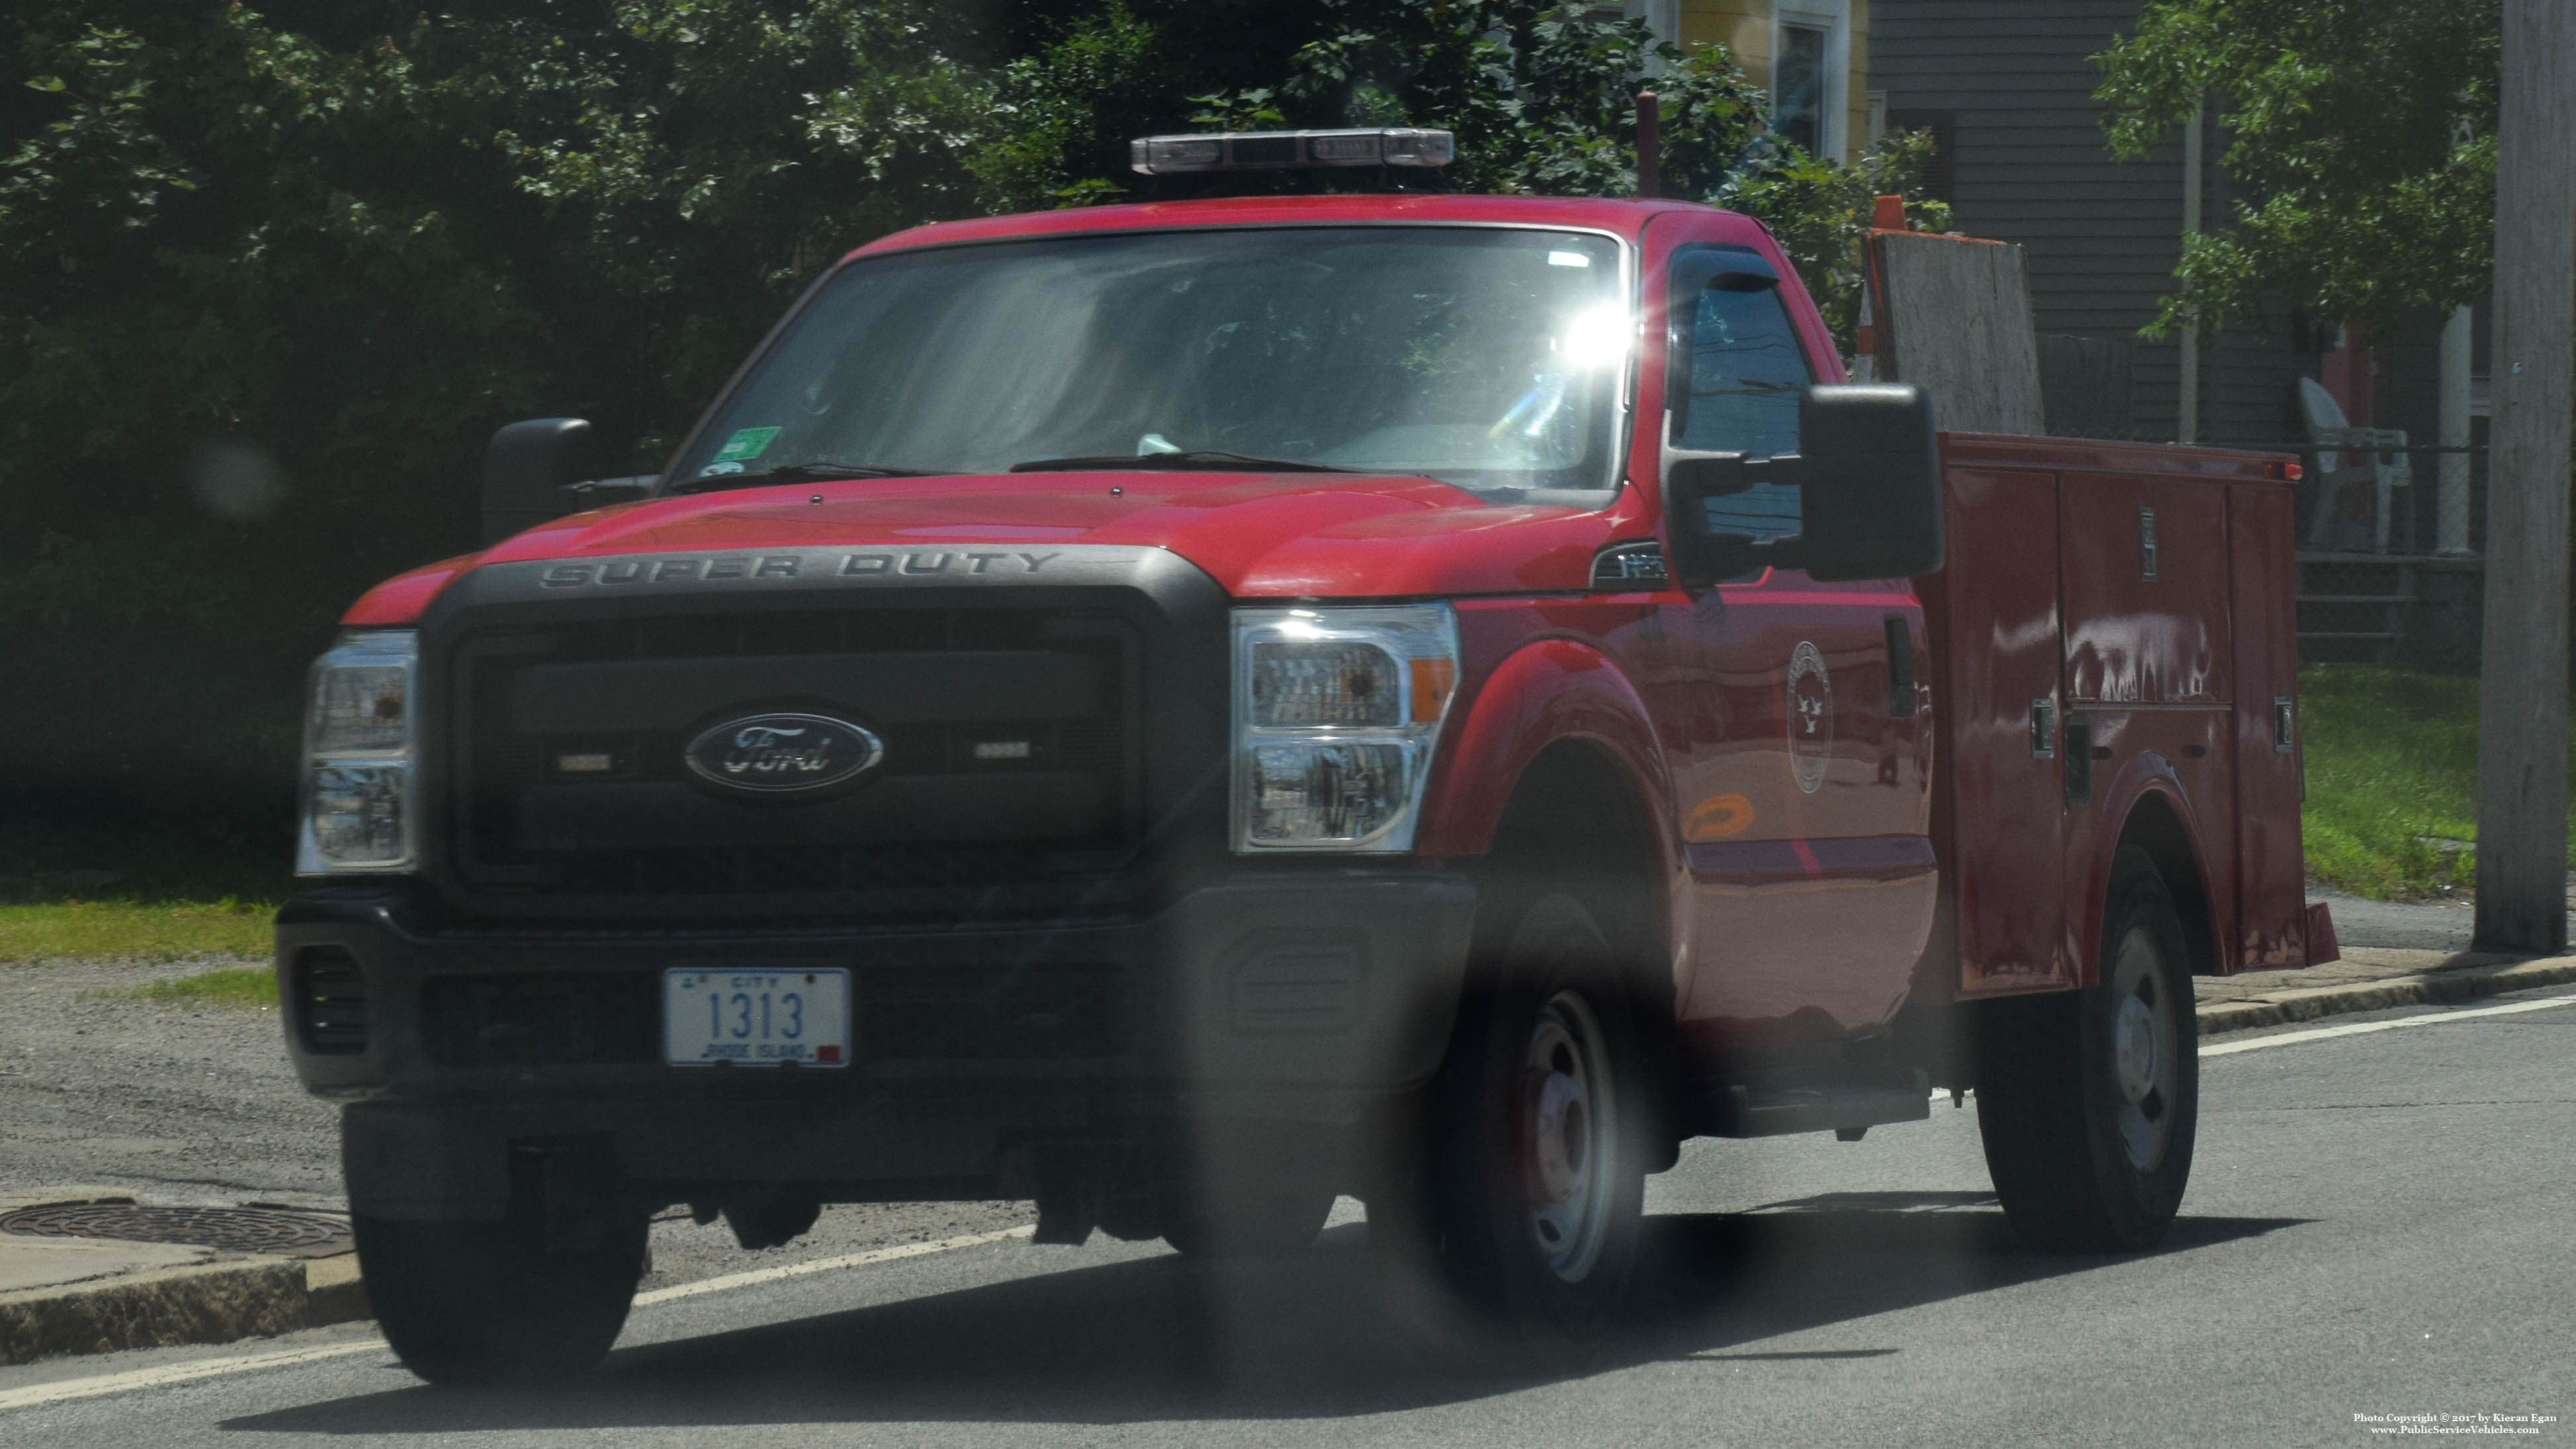 A photo  of East Providence Highway Division
            Truck 1313, a 2011-2016 Ford F-250             taken by Kieran Egan